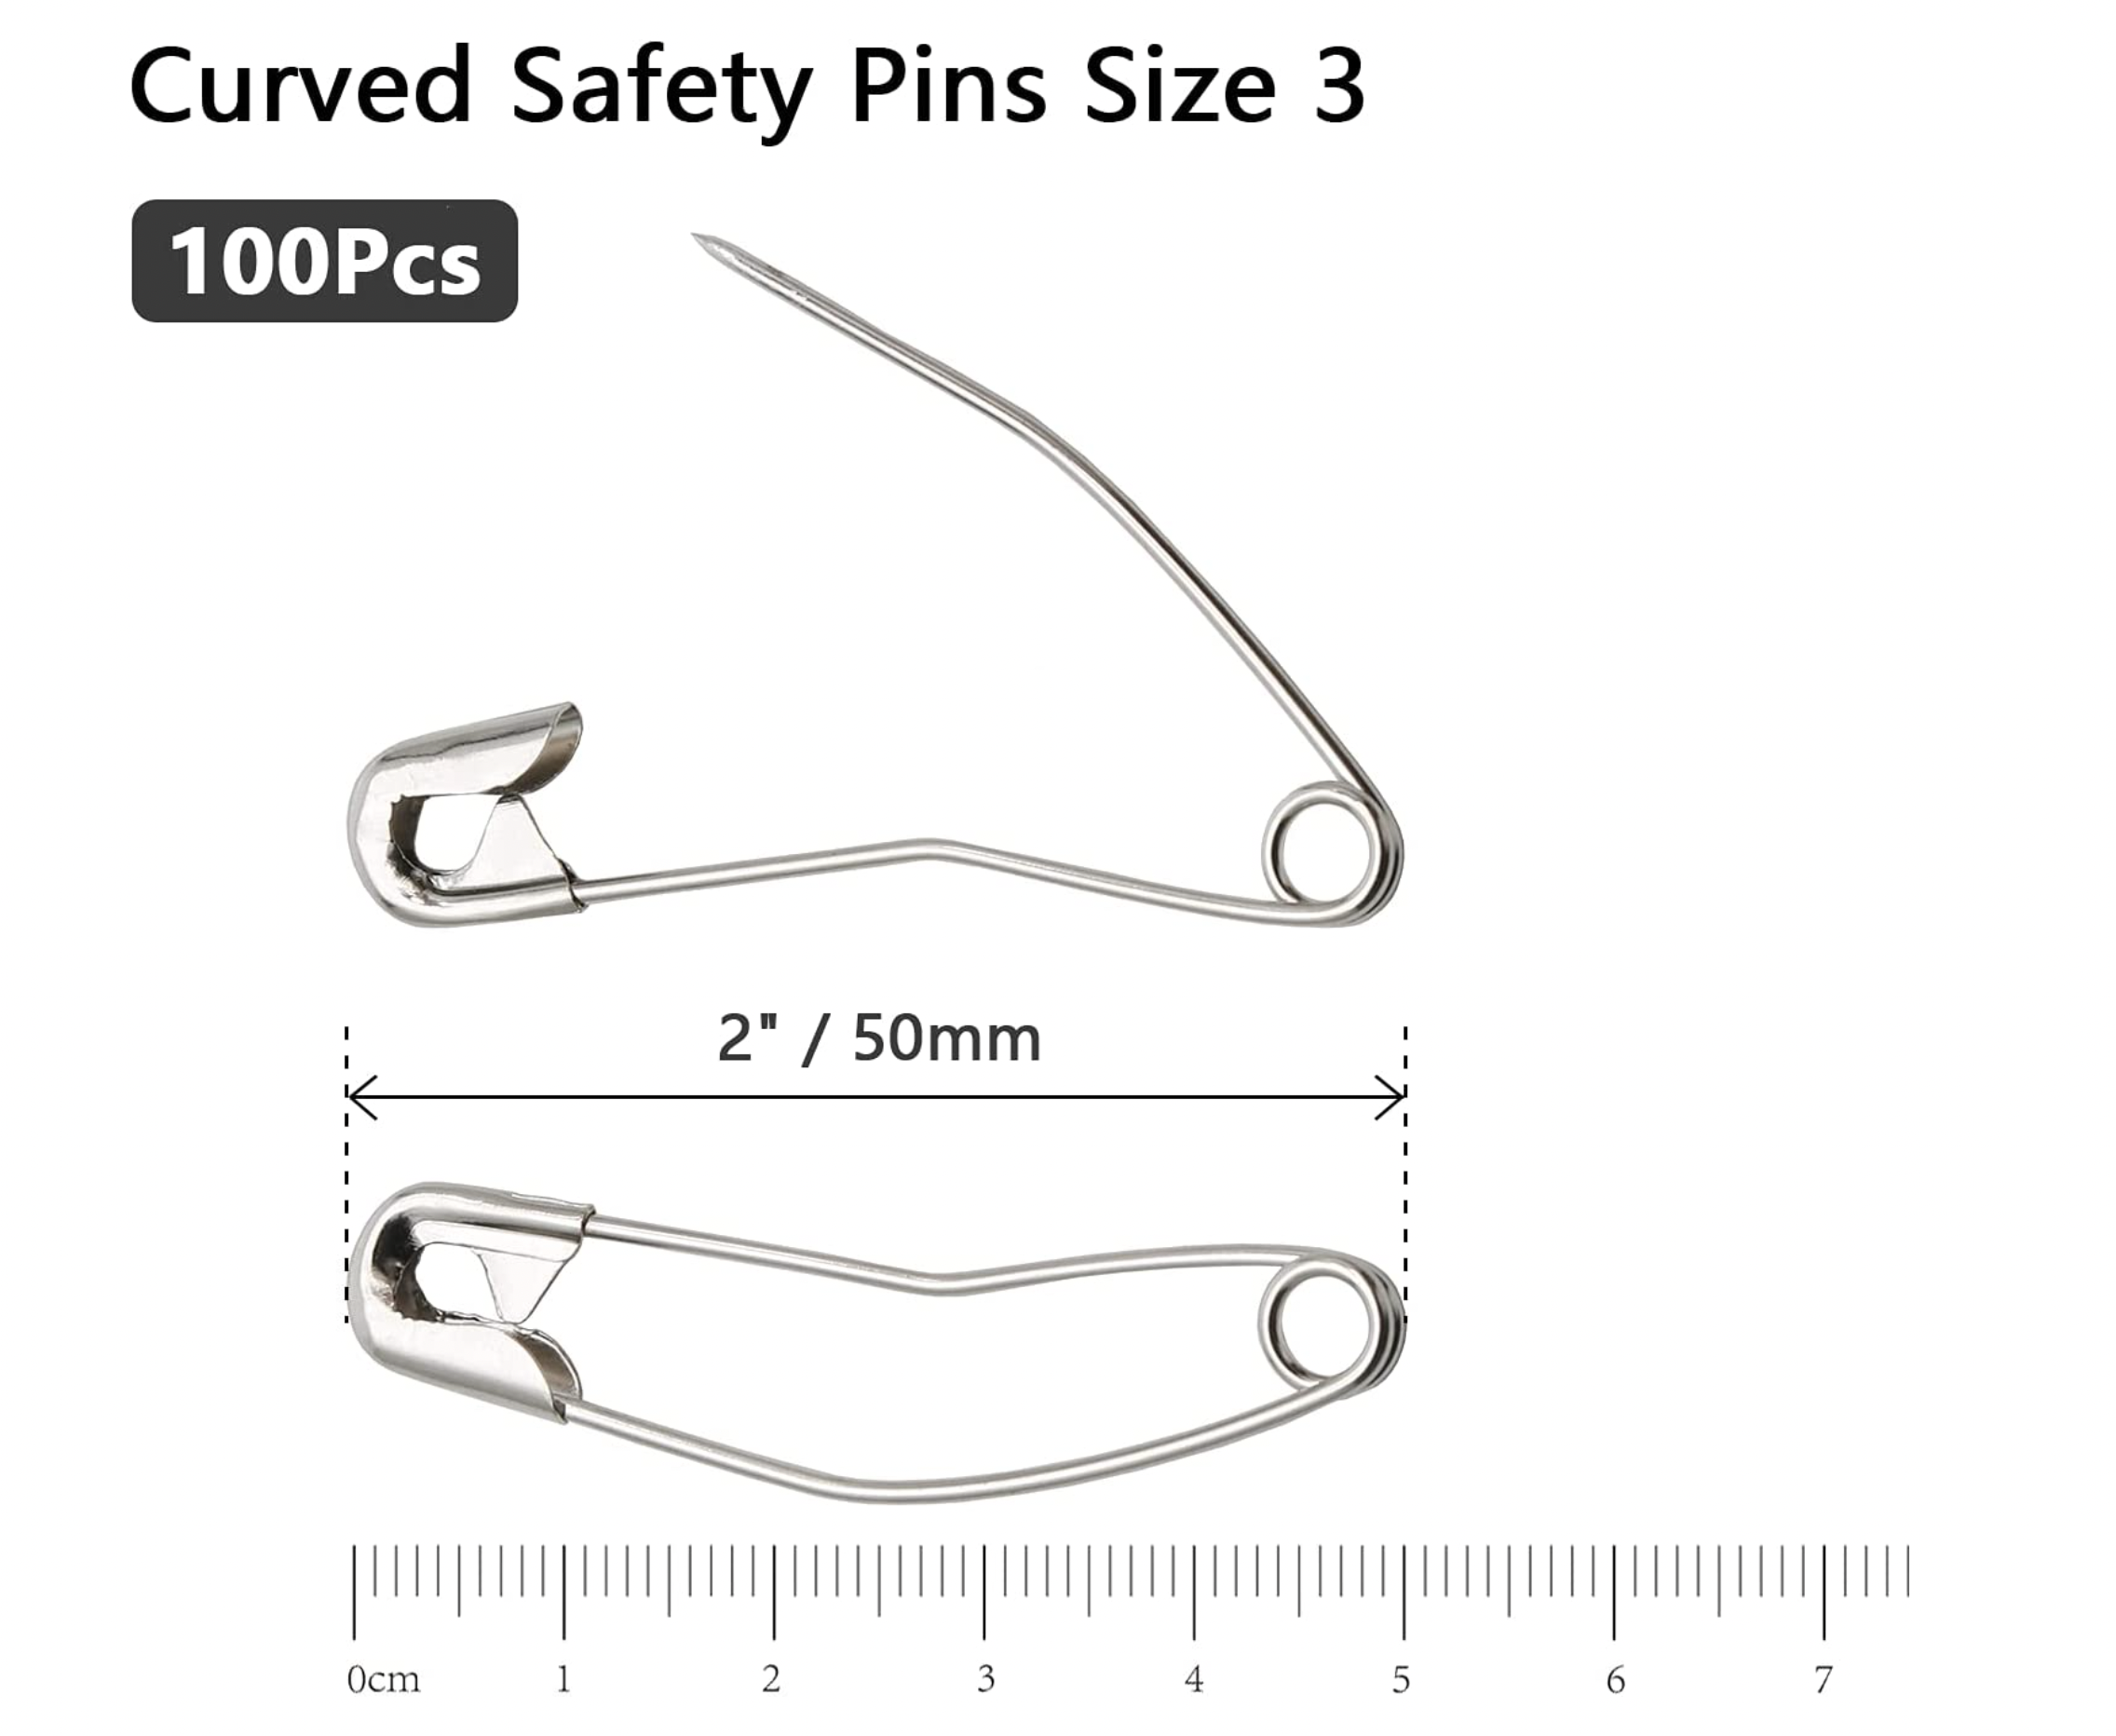 Curved Safety Pins | Quiltblox.com